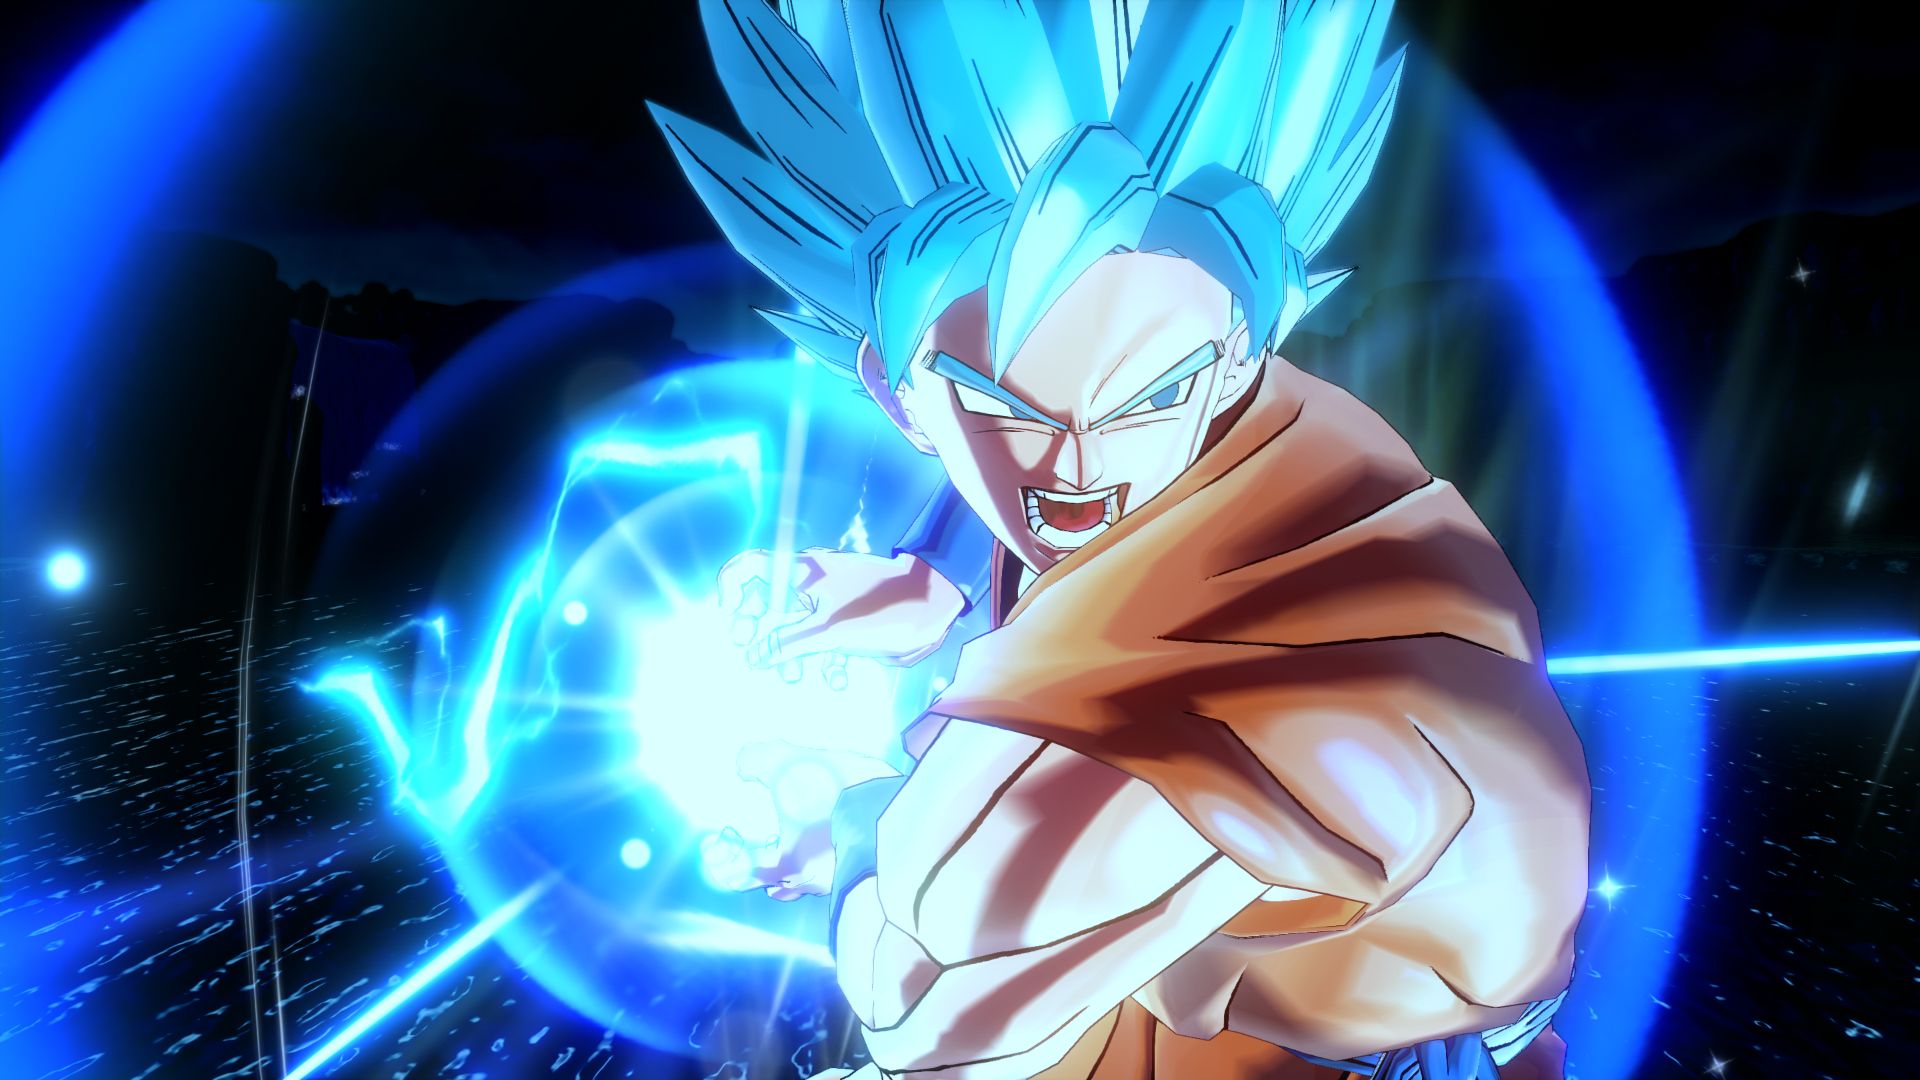 Dragon Ball Xenoverse 2 Review - Just More of the Same